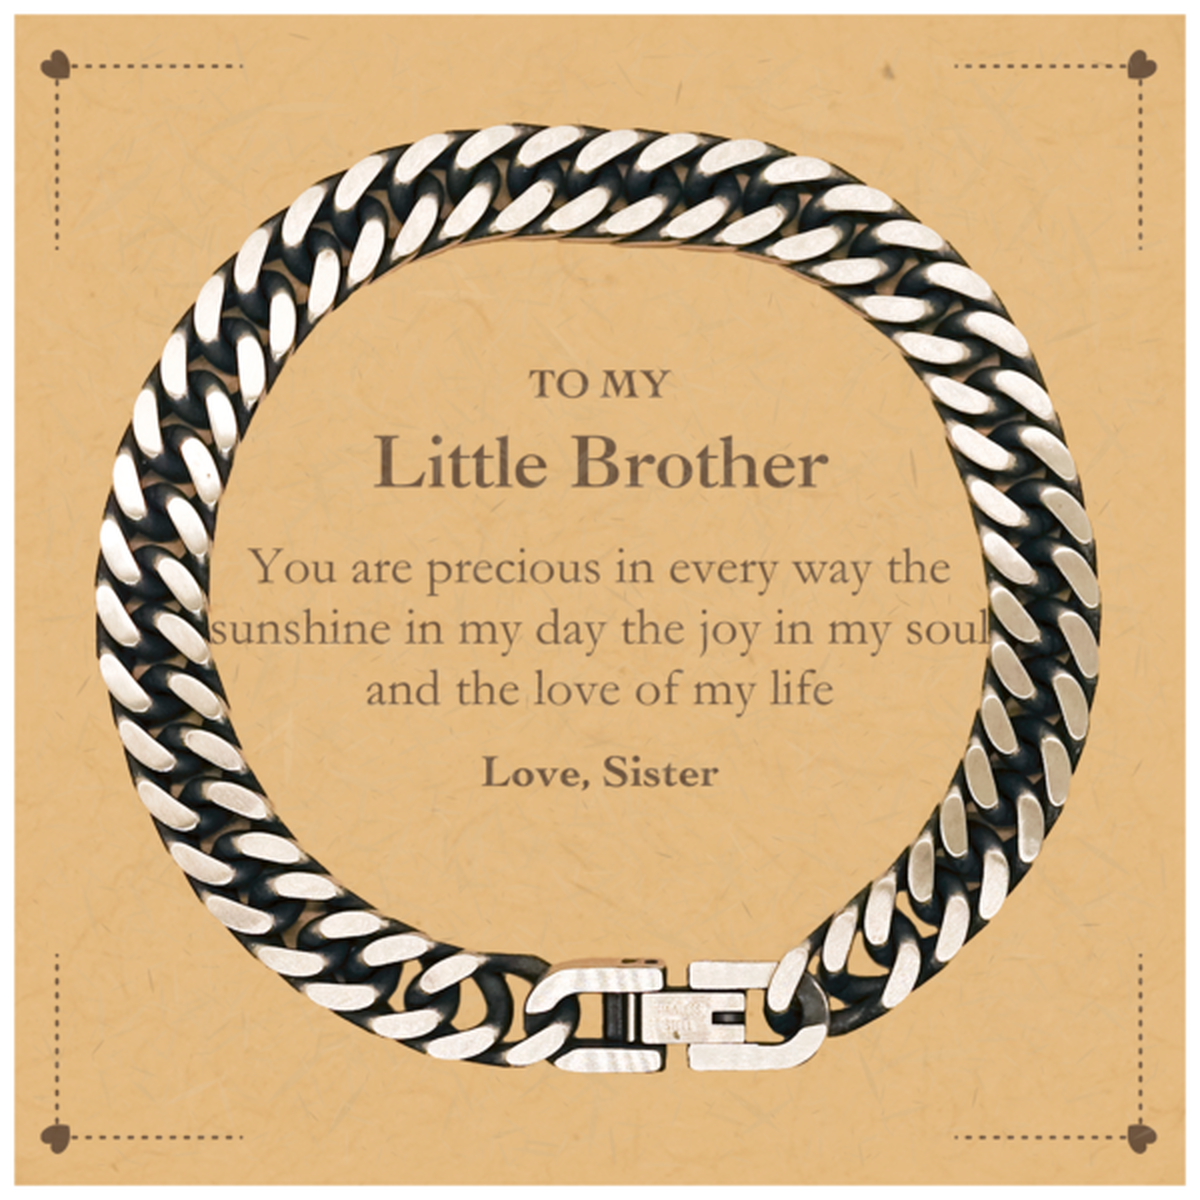 Graduation Gifts for Little Brother Cuban Link Chain Bracelet Present from Sister, Christmas Little Brother Birthday Gifts Little Brother You are precious in every way the sunshine in my day. Love, Sister